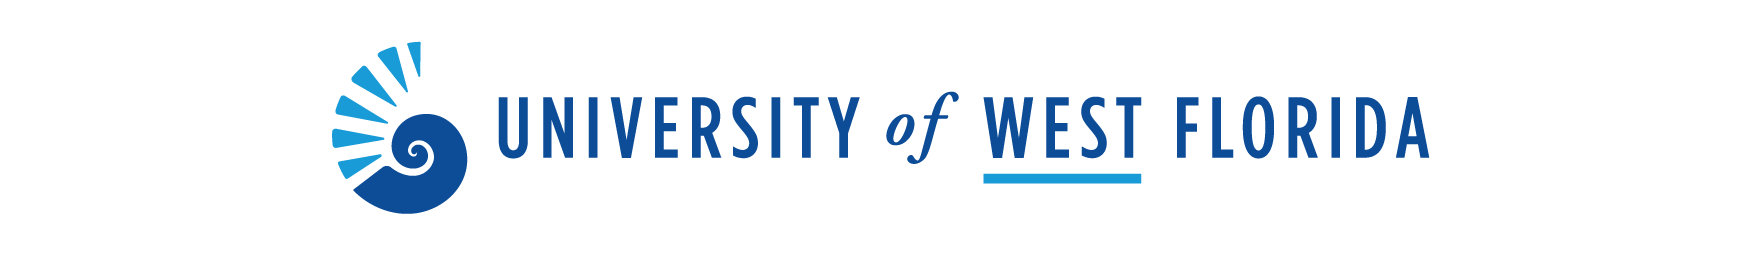 Secondary institutional logo for the University of West Florida